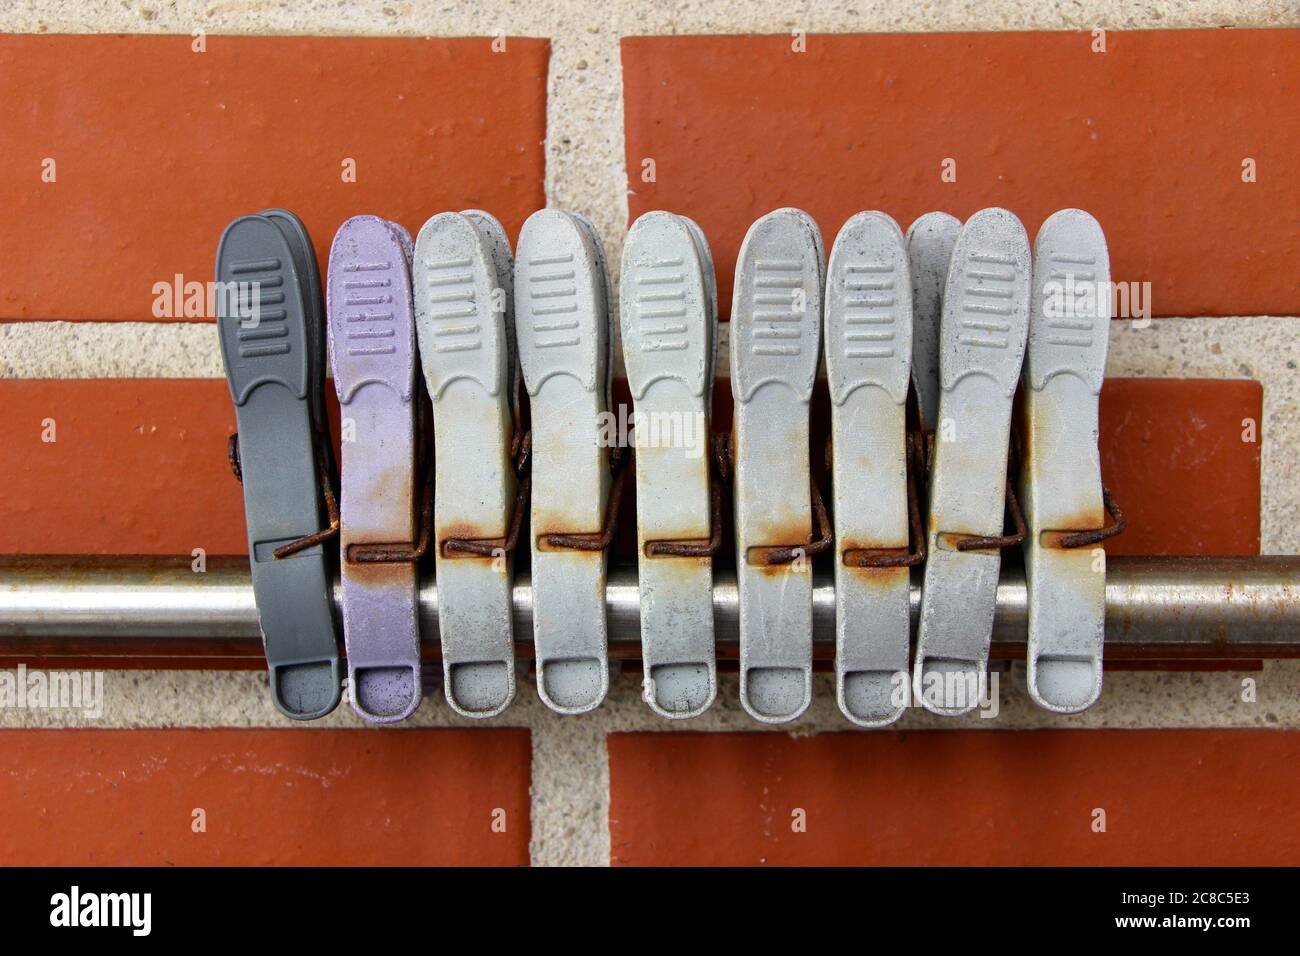 Photo of Old grey and purple plastic pegs with rusting metal on an aluminium rod against a red brick wall Stock Photo